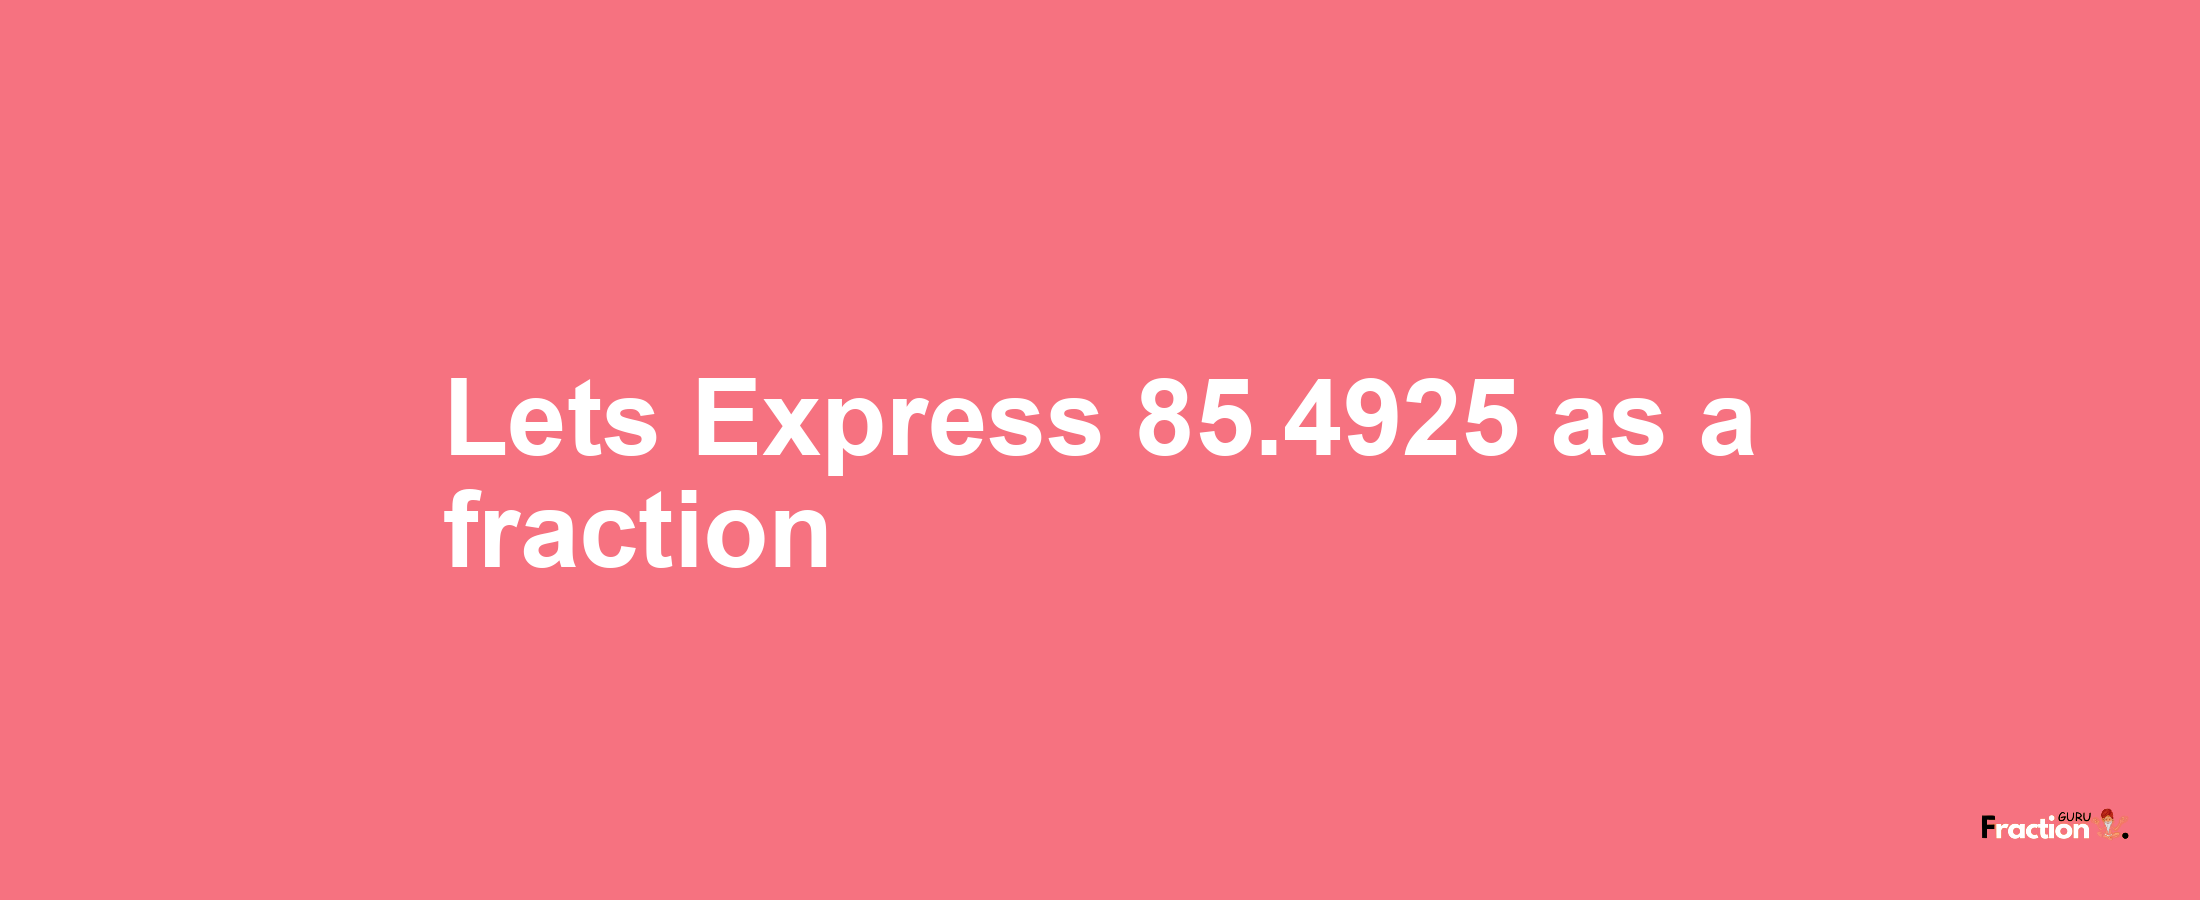 Lets Express 85.4925 as afraction